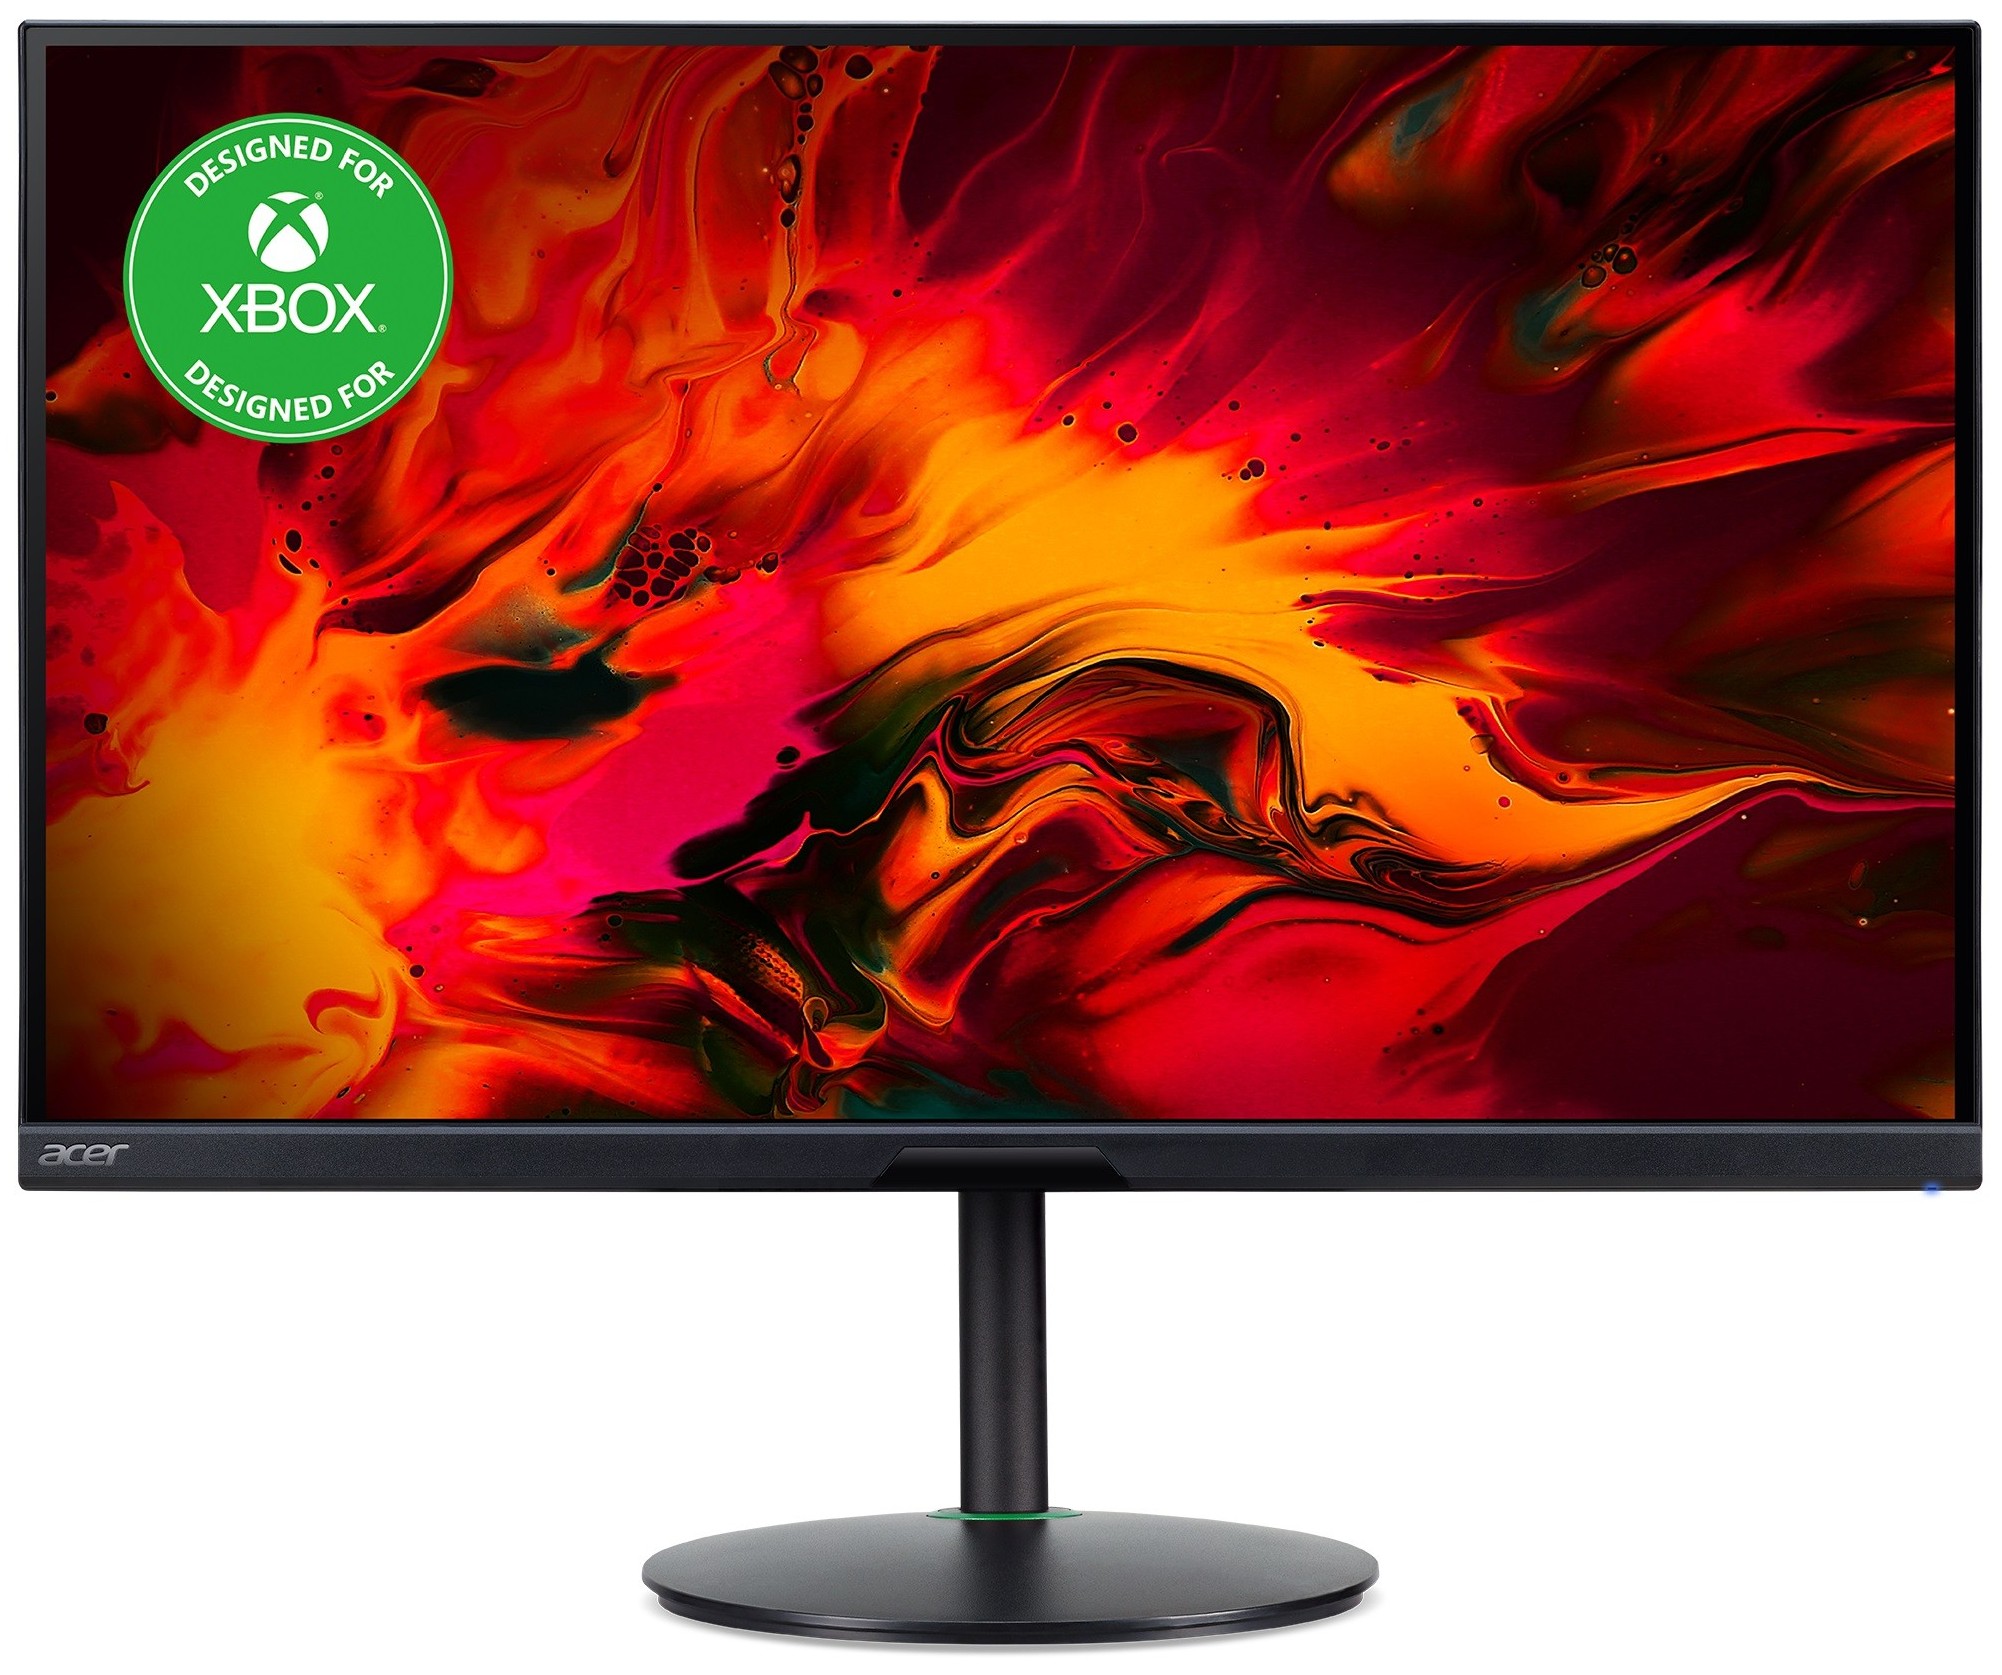 Introducing New Designed for Xbox Monitors Unlocking the True